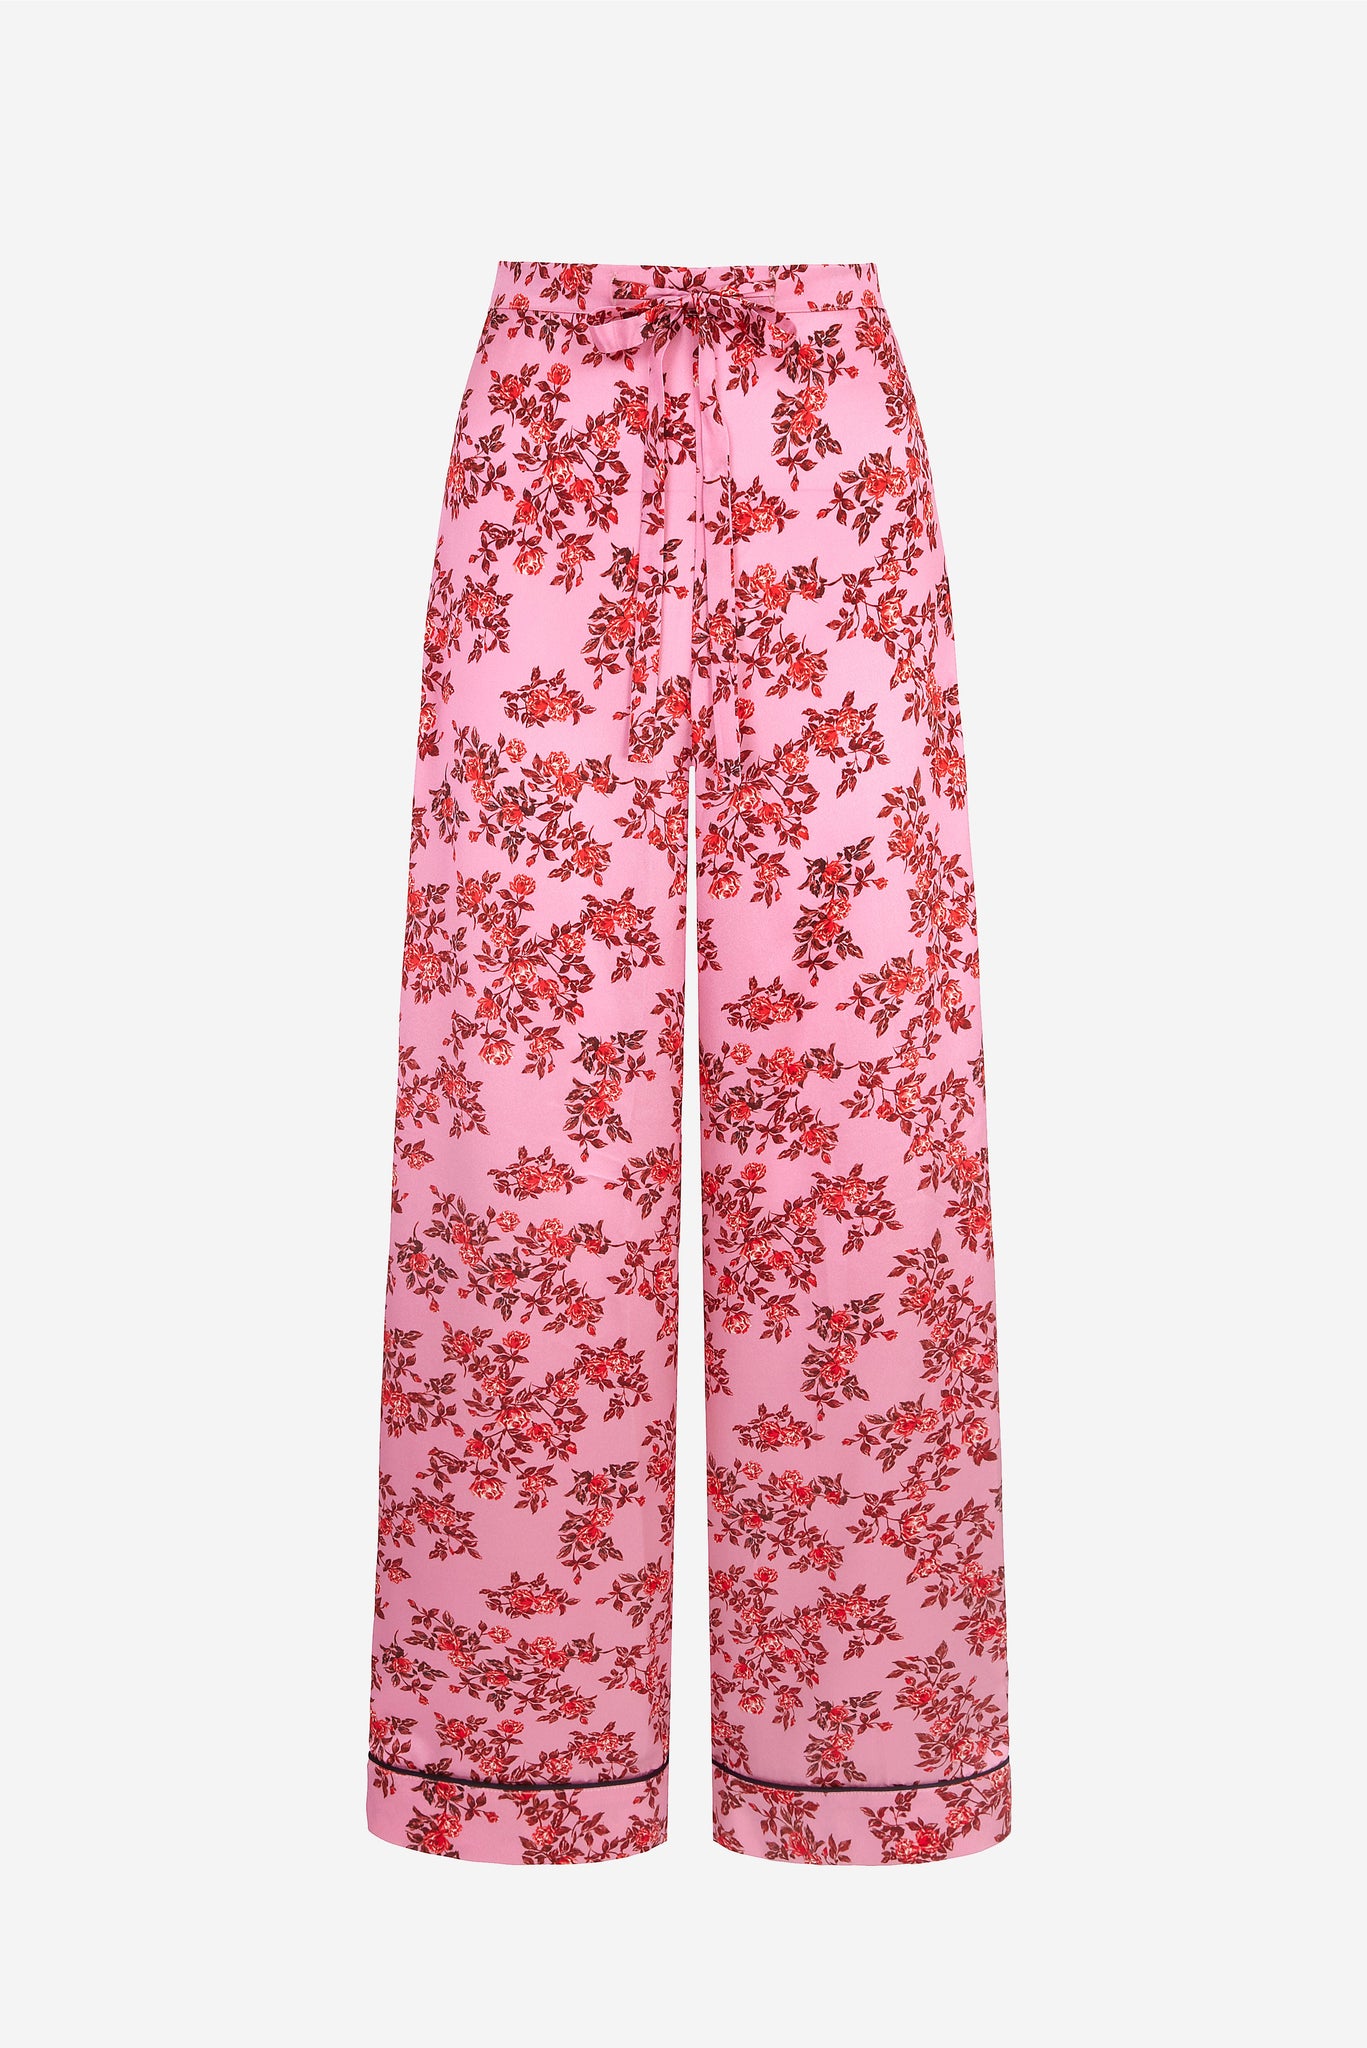 Ithaca Red Roses On Pink Silk Satin Trousers | Emilia Wickstead